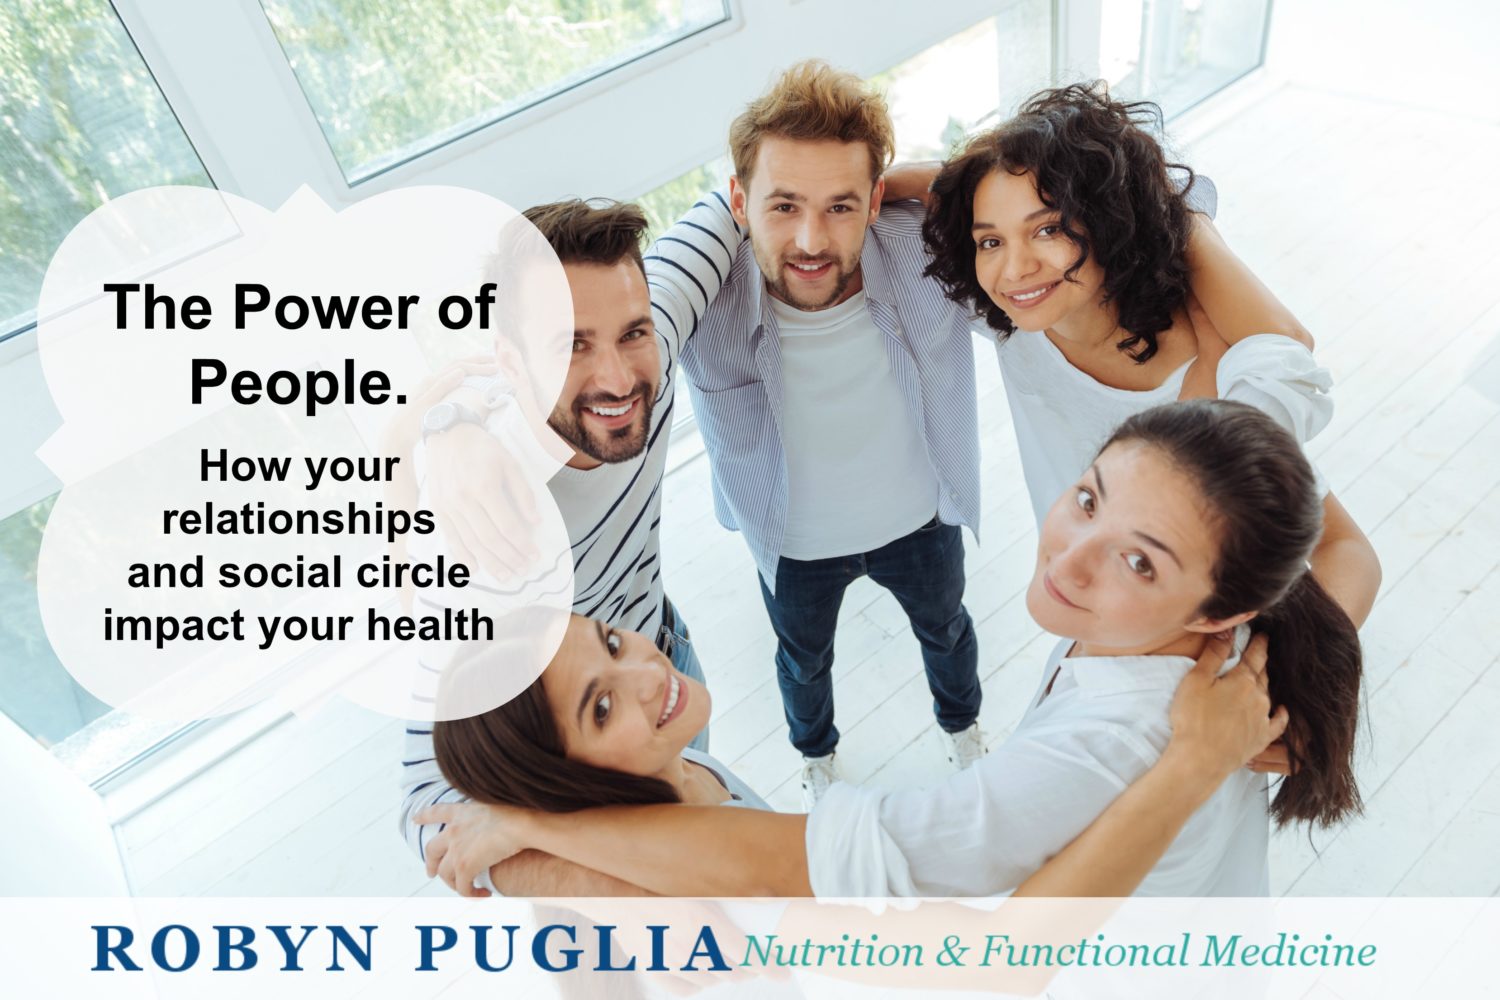 Power of People. How your relationships and social circle impact your health